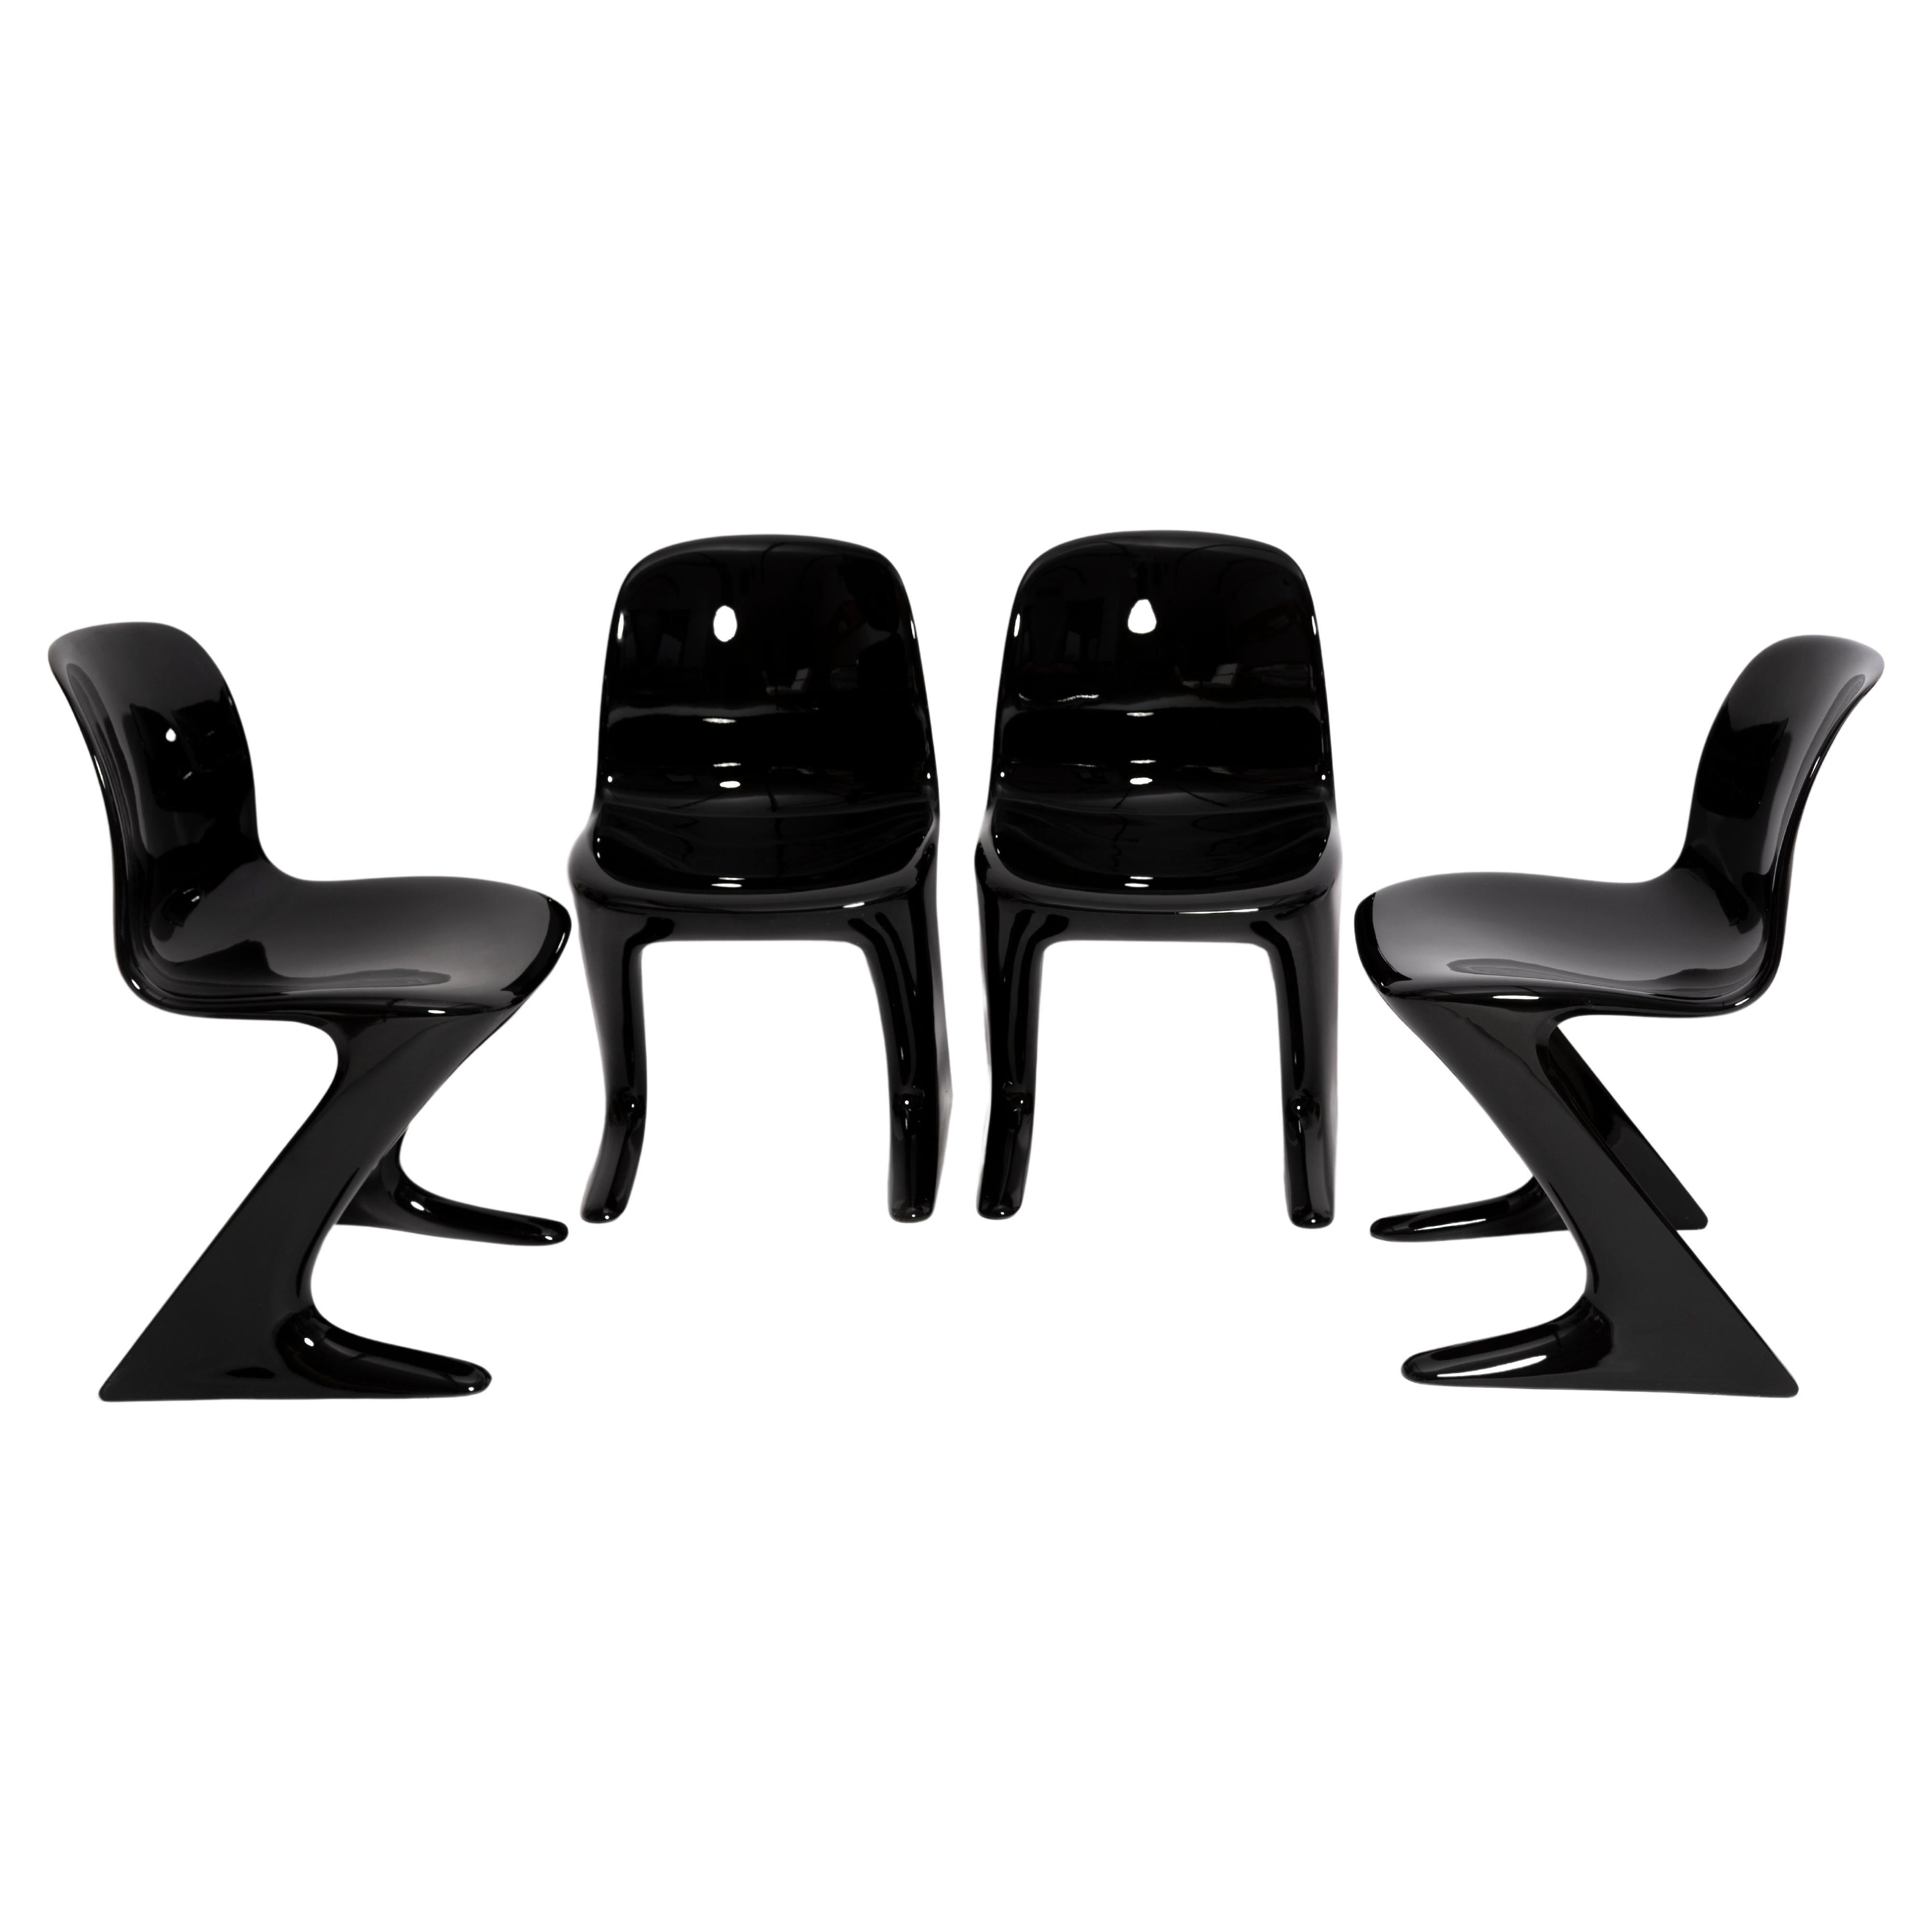 Four Mid Century Black Kangaroo Chairs Designed by Ernst Moeckl, Germany, 1960s For Sale